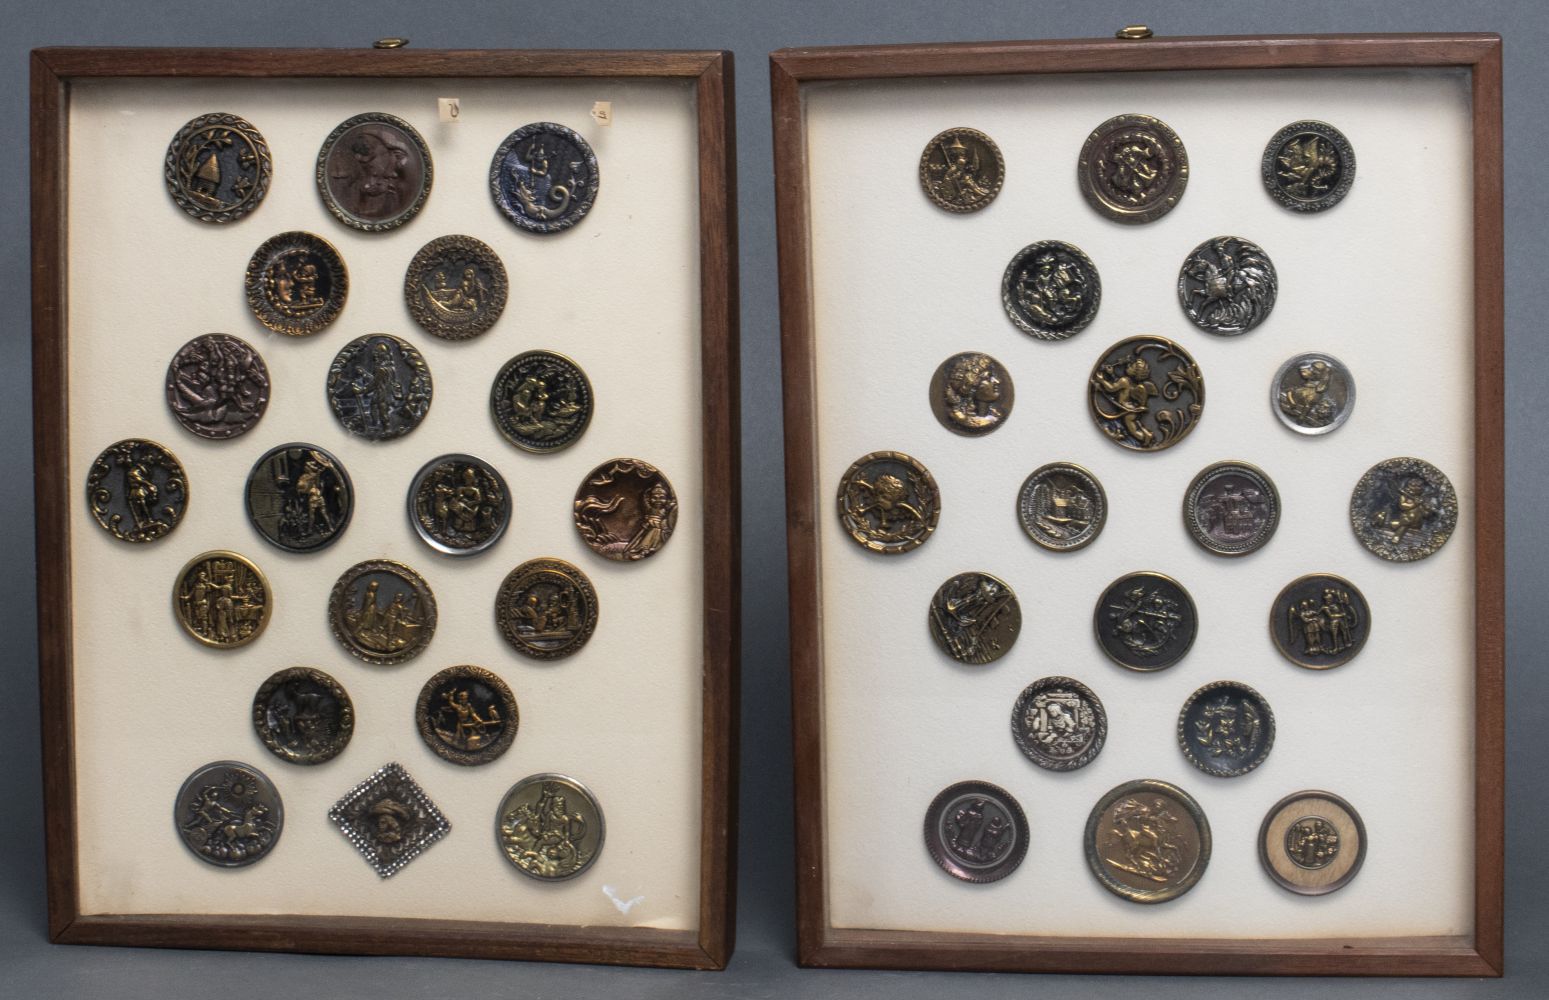 FRAMED COLLECTION OF METAL BUTTONS 3c55ec